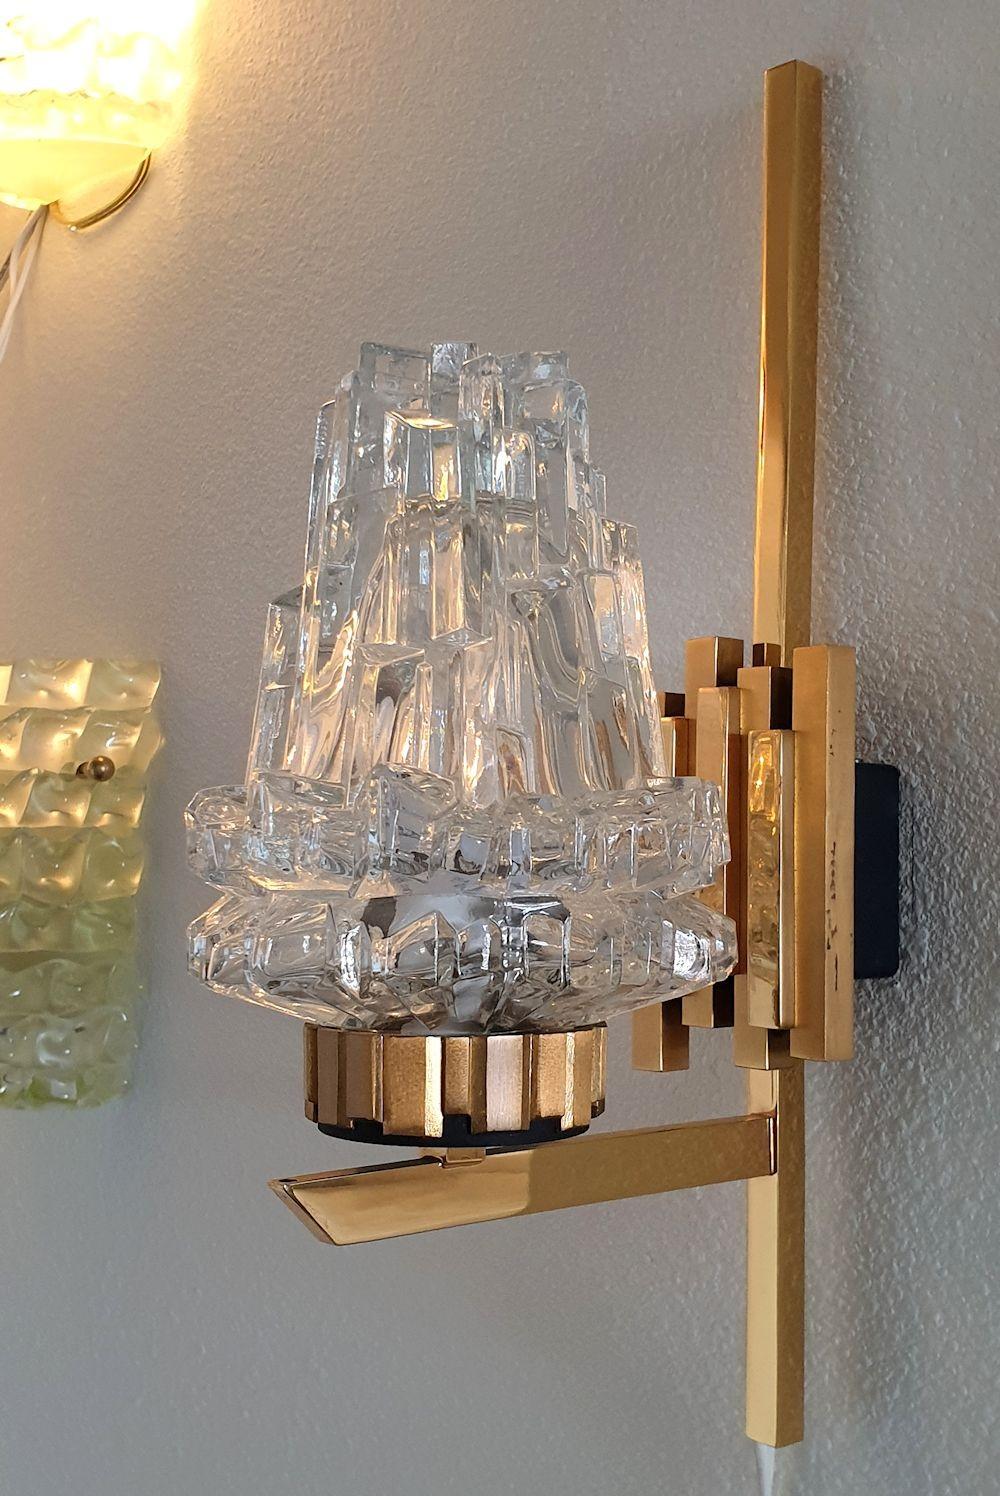 Mid-Century Modern pair of stylish sconces, by Maison Arlus, France 1950s.
The vintage pair of sconces is made of a sculpted thick clear crystal shade, nesting the light, and a brass frame with black accents.
1 Light each, rewired for the US.
In